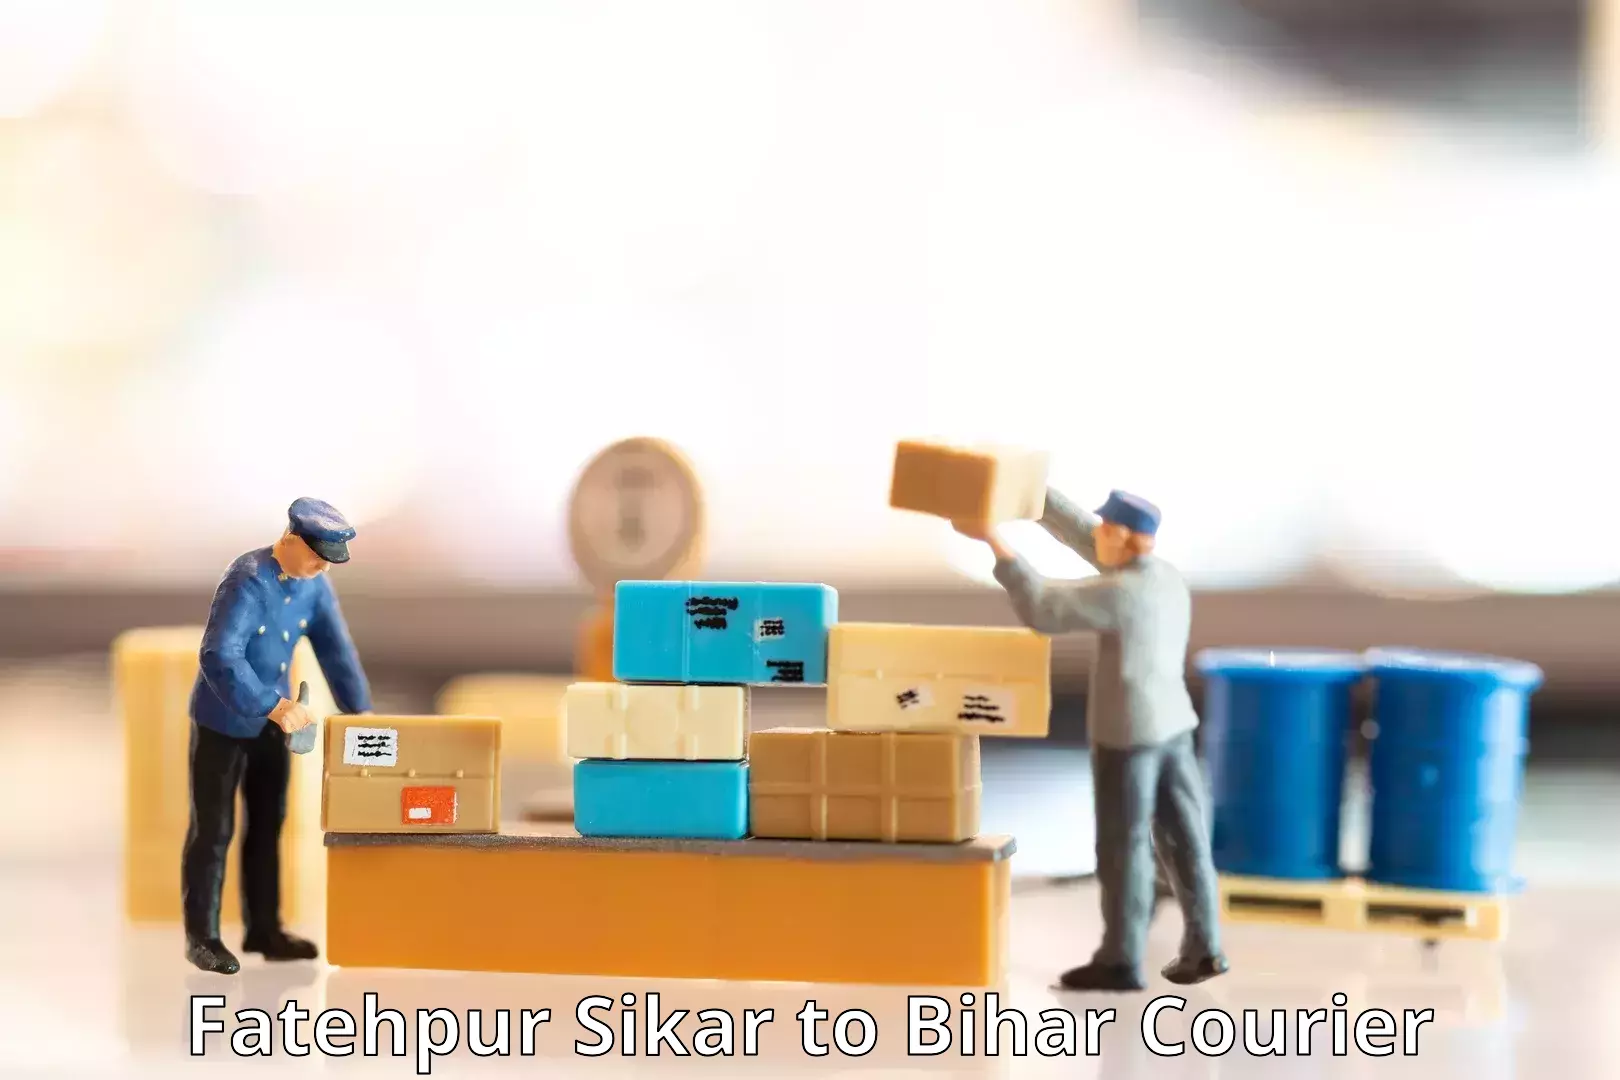 Courier service partnerships Fatehpur Sikar to Bhojpur